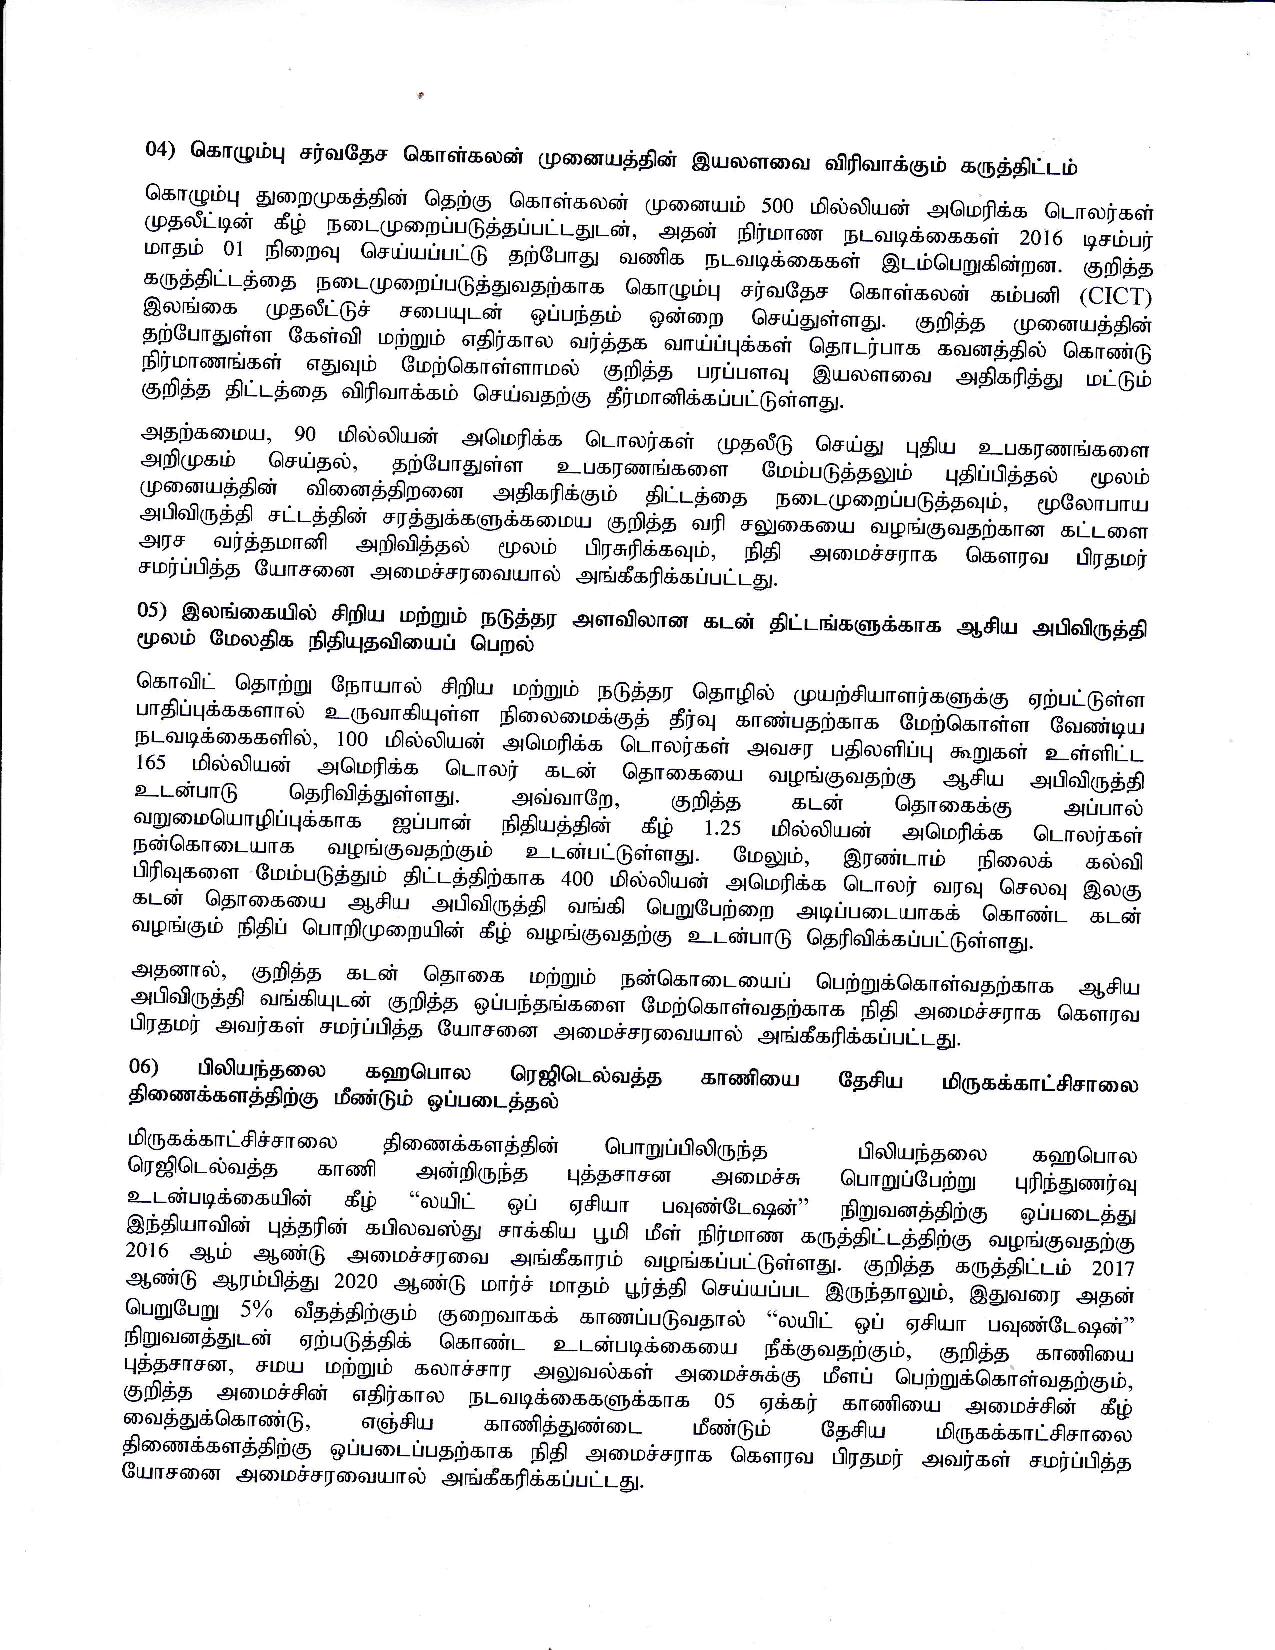 Cabinet Decision on 26.10.2020 Tamil page 002